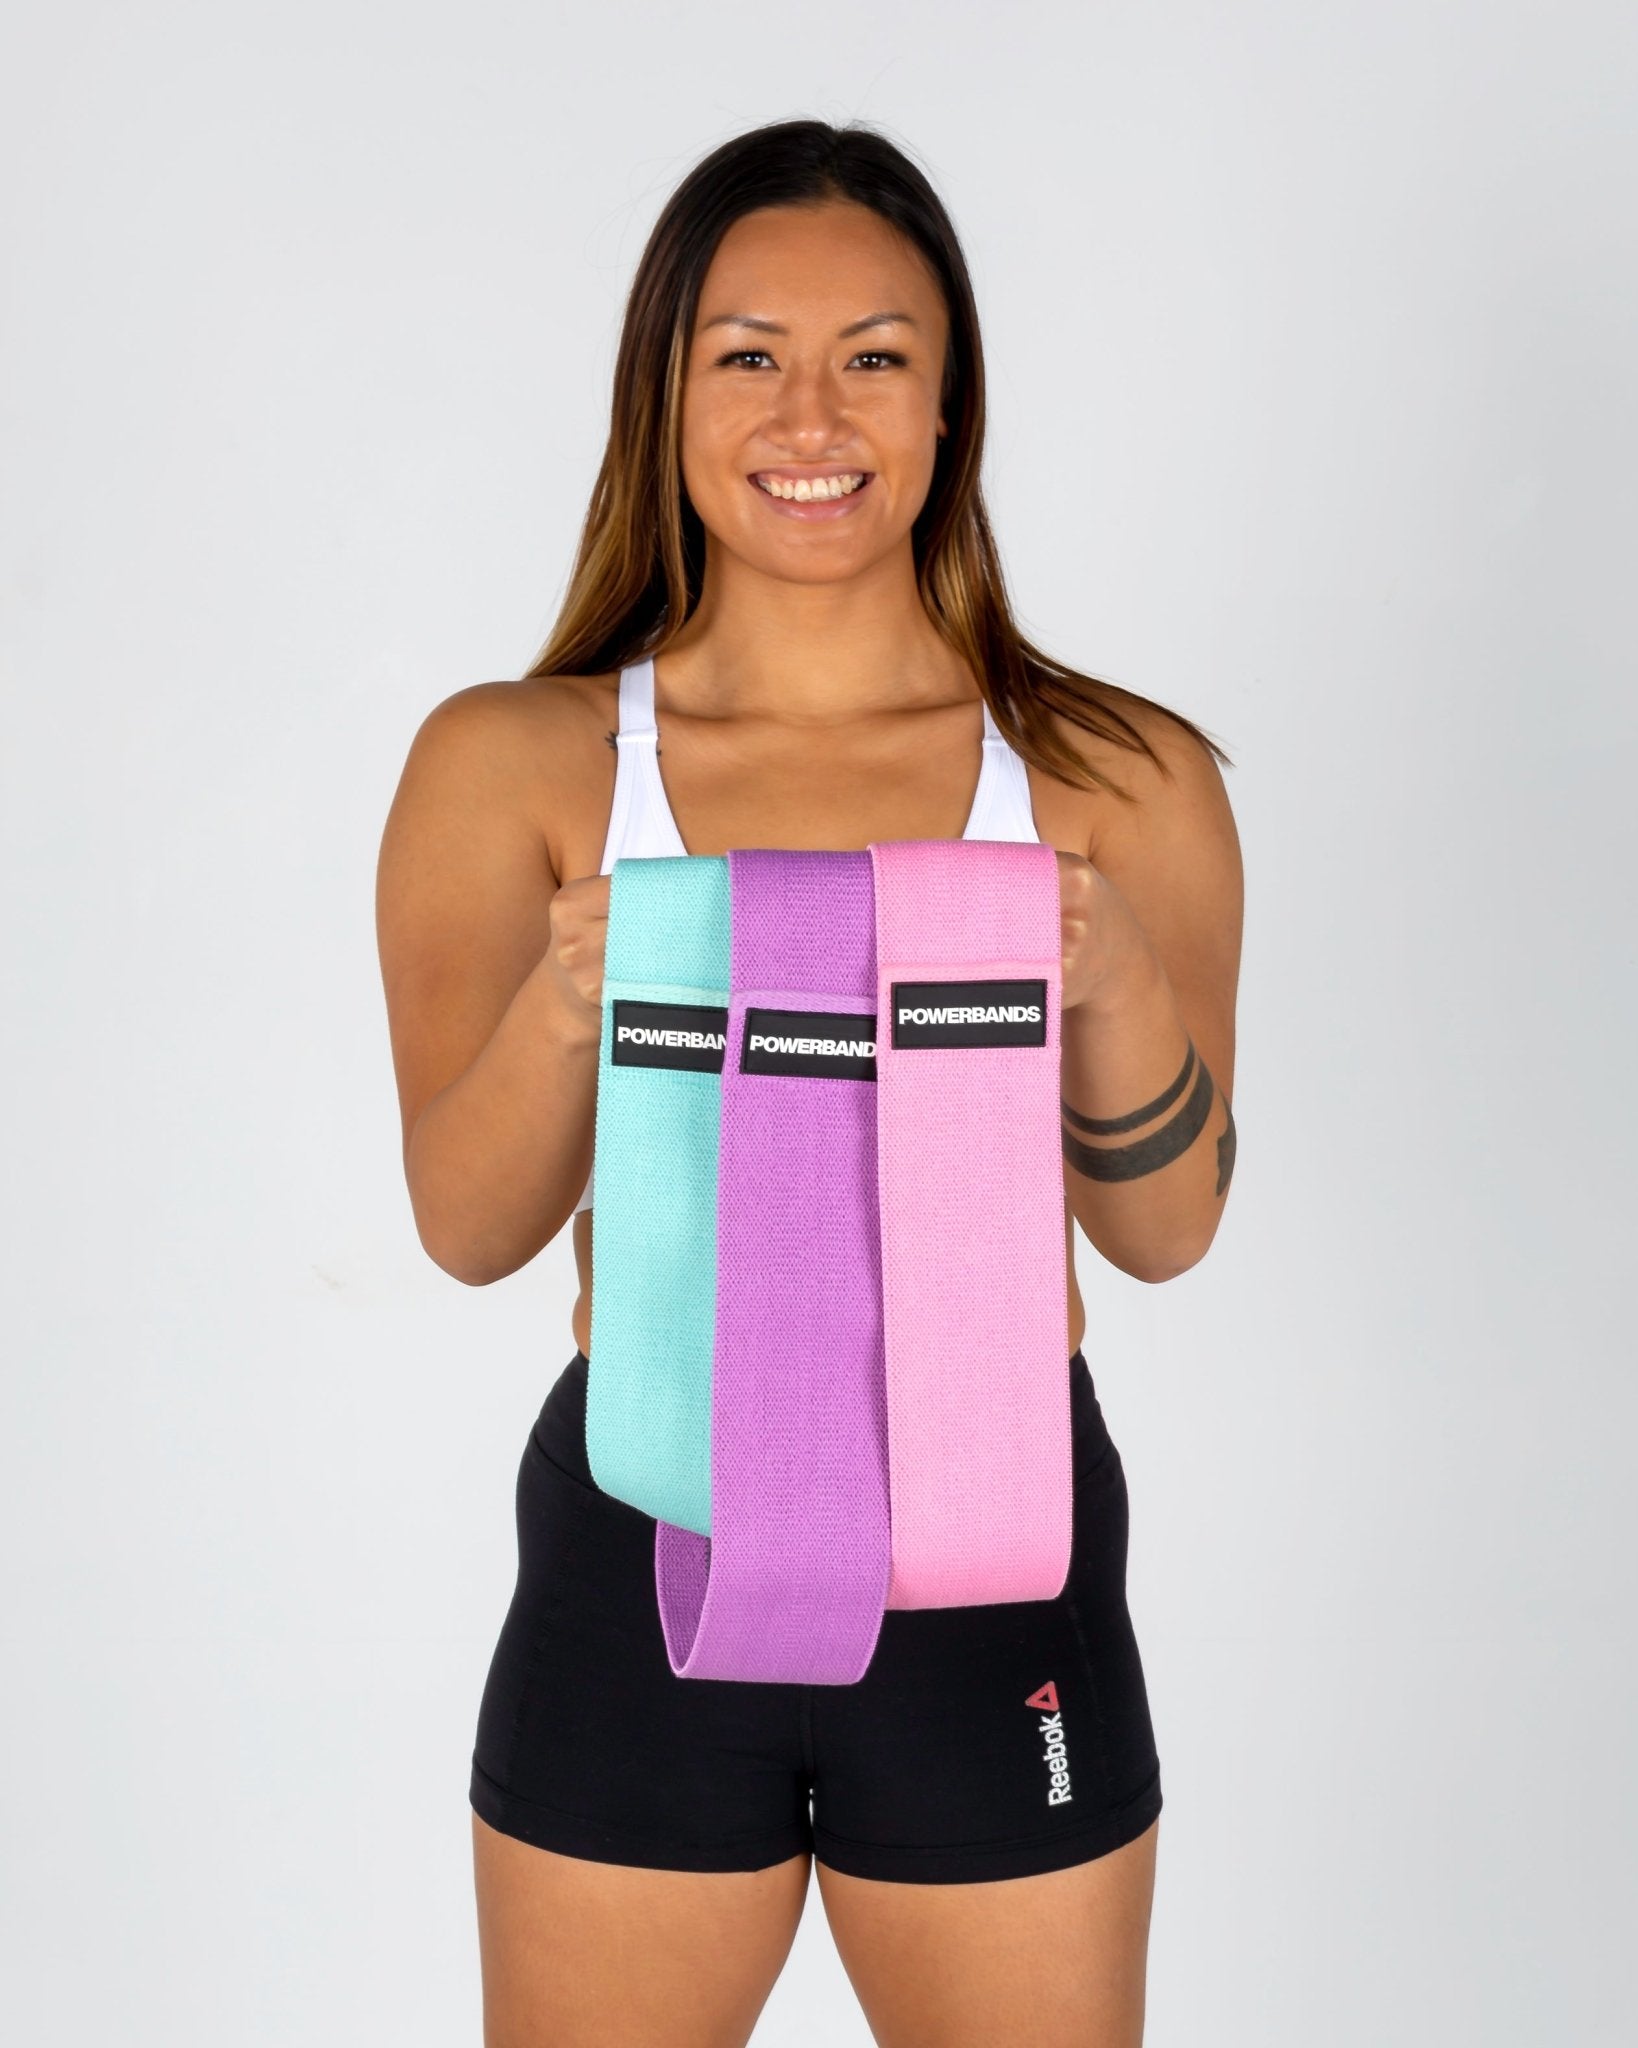 4 Dumbbell Exercises Where You Can Add Resistance Bands - POWERBANDS®